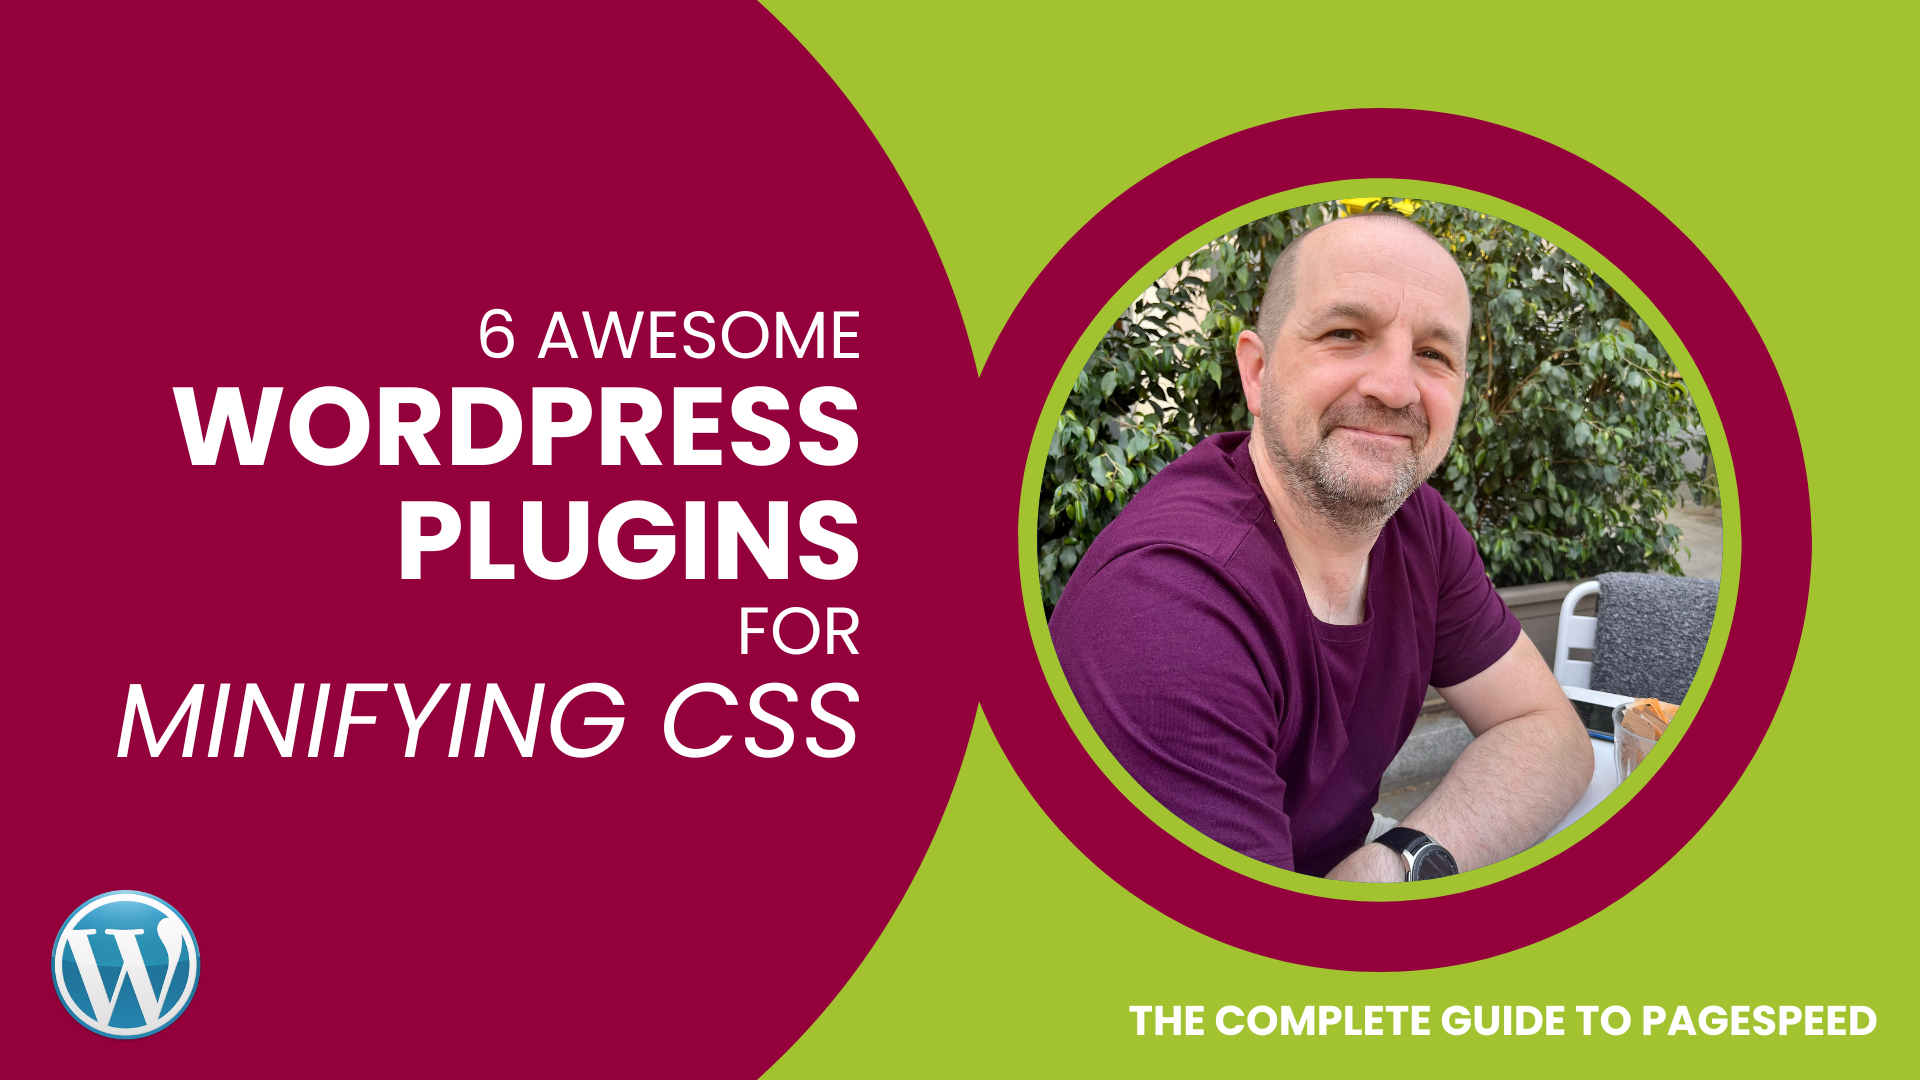 6 Awesome WordPress Plugins for Minifying CSS